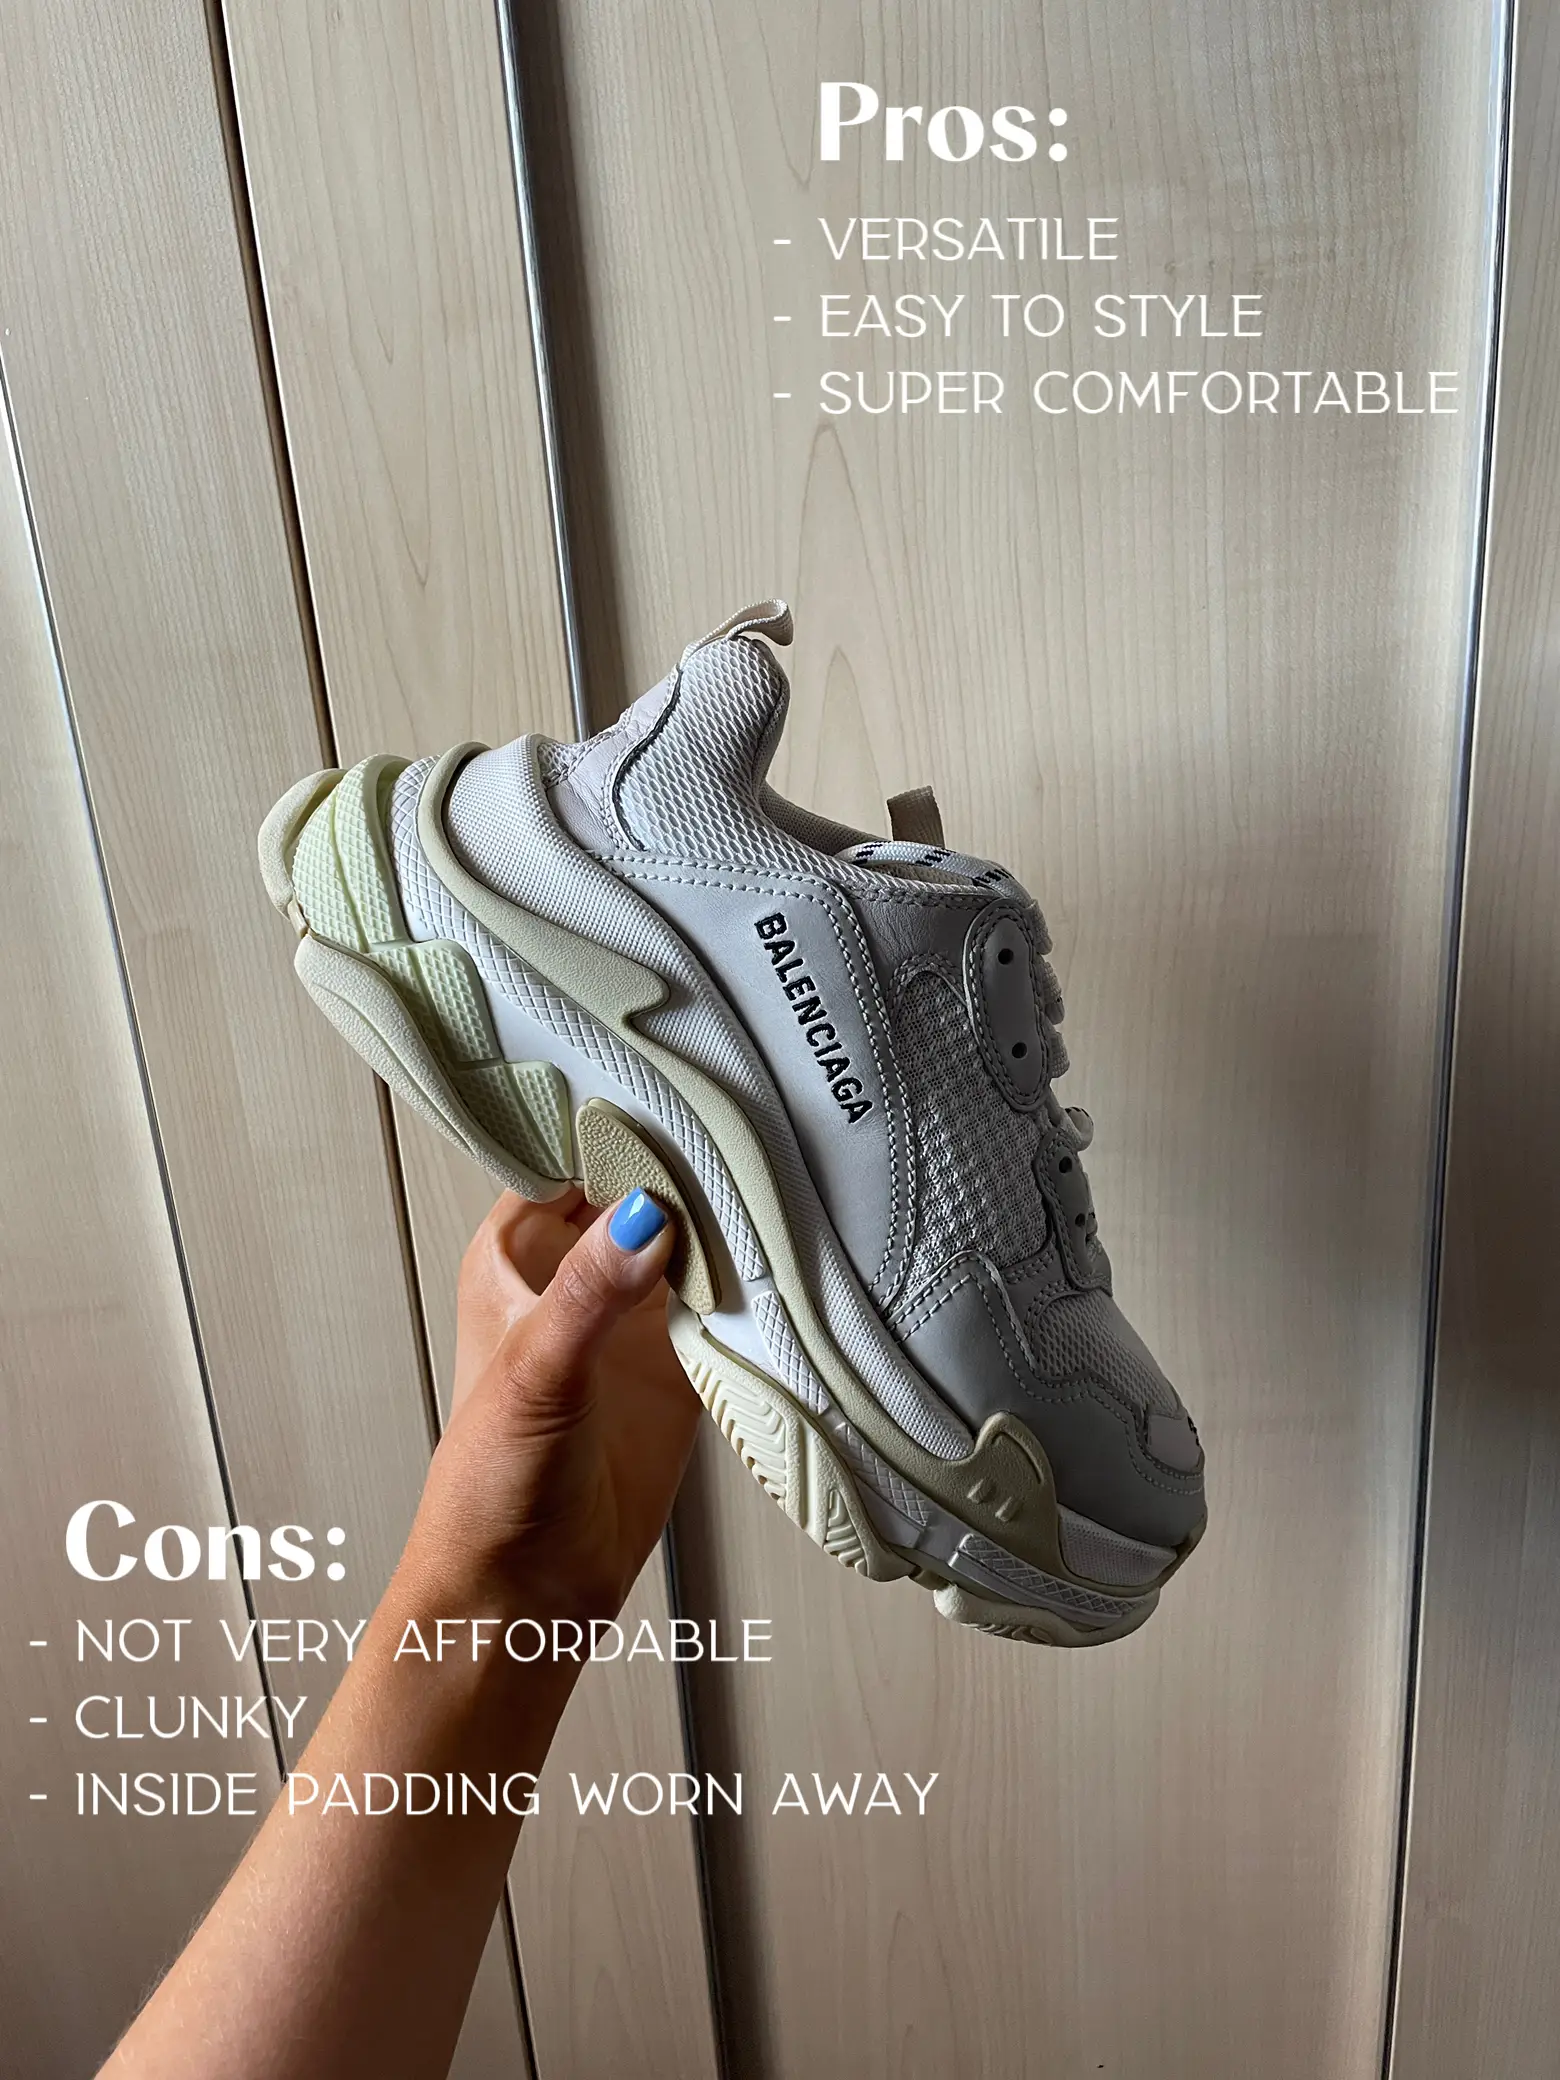 Look at these Nice Balenciaga DHGate Replica Sneakers. Get them